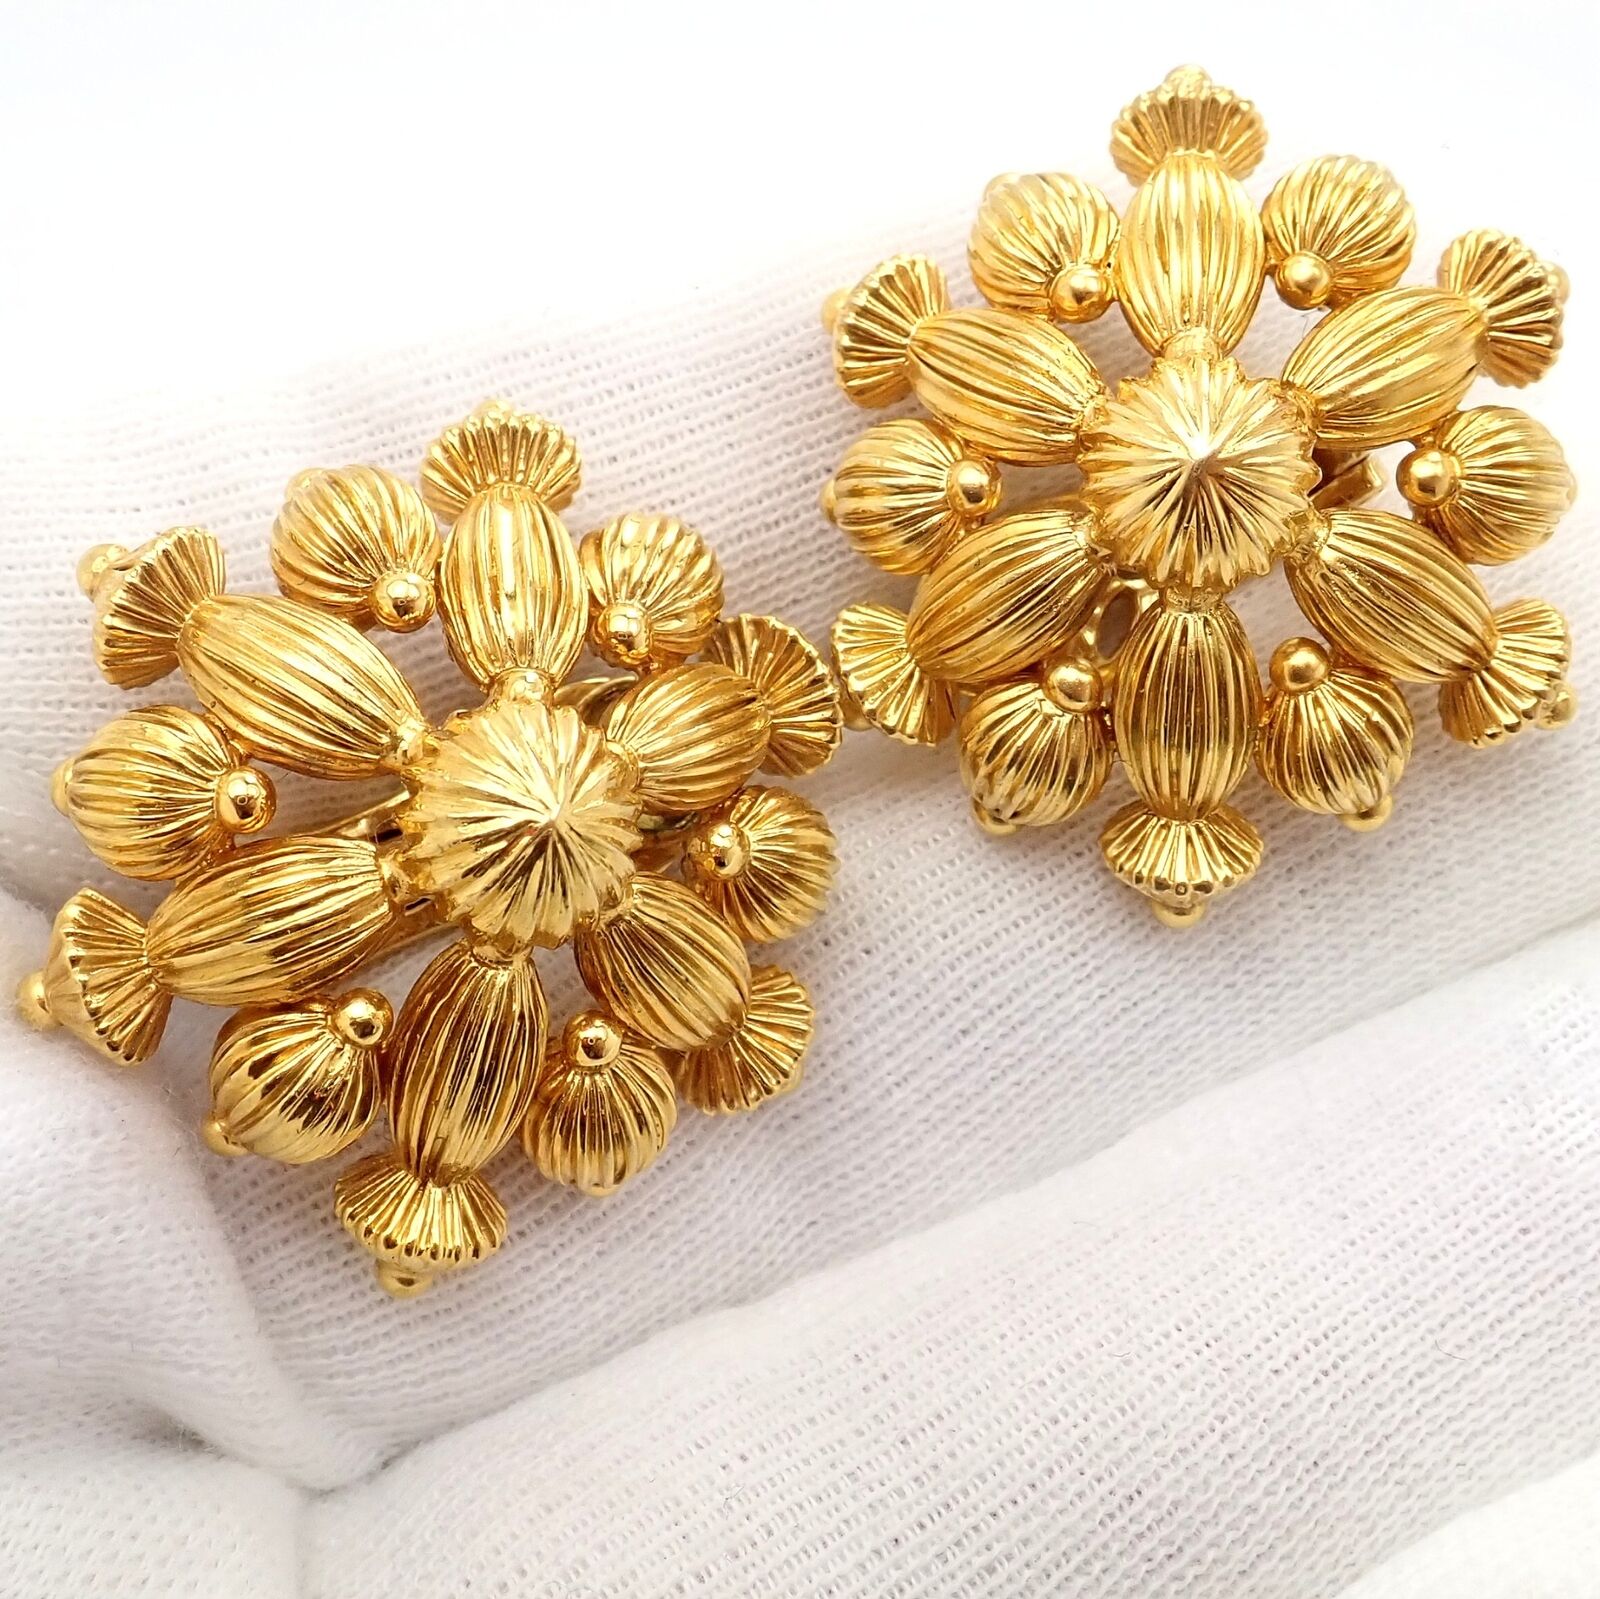 Lalaounis Jewelry & Watches:Vintage & Antique Jewelry:Earrings Vintage Estate Ilias Lalaounis 18k Yellow Gold Carved Bead Ball Earrings